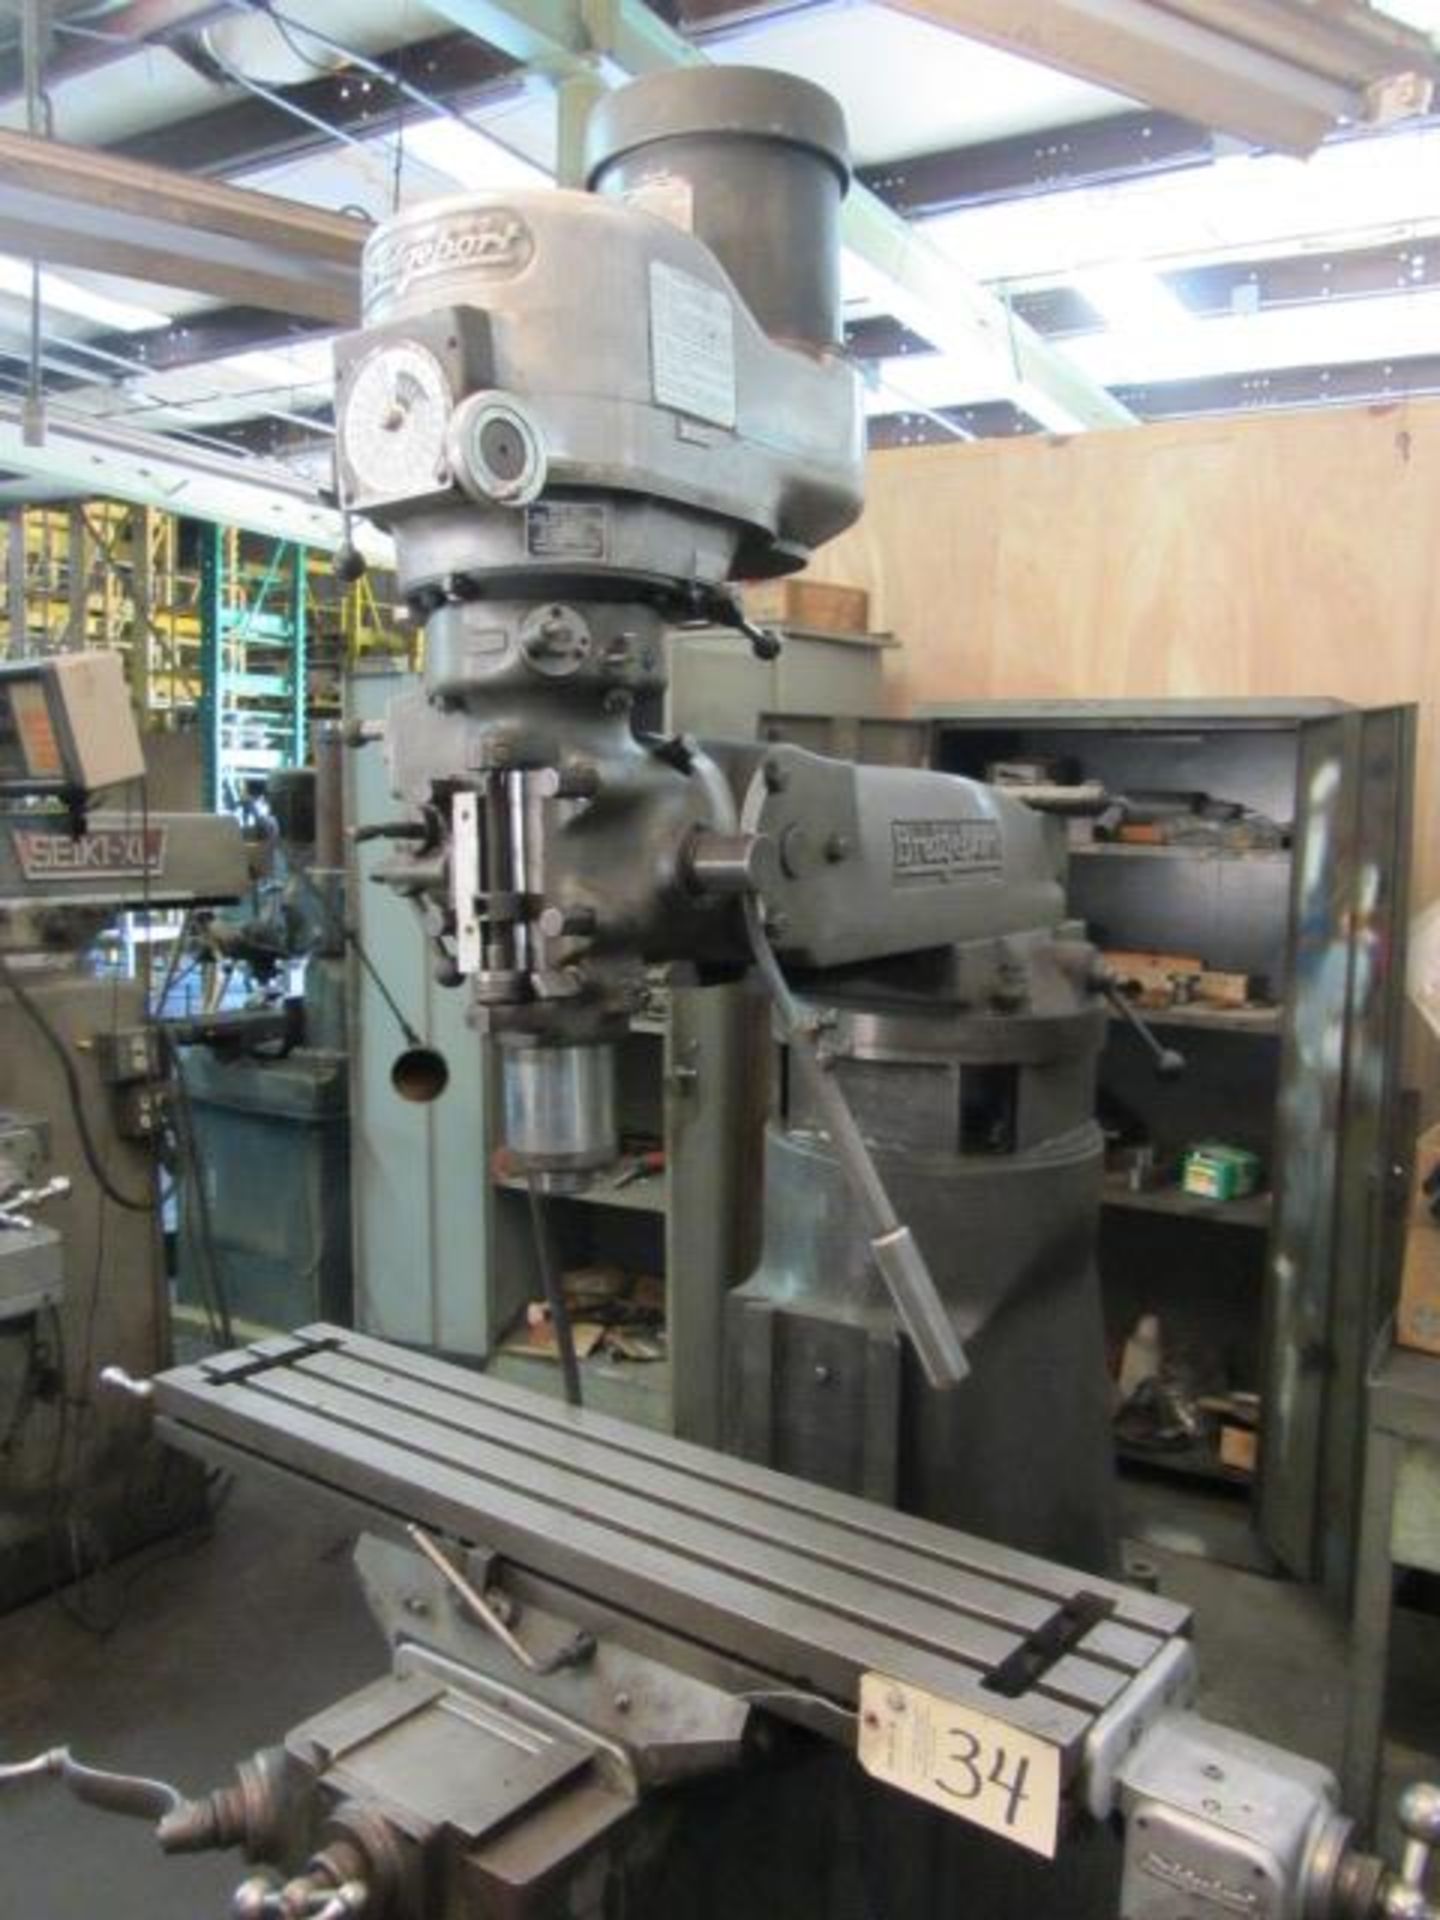 Bridgeport Vertical Milling Machine with R-8 Variable Spindle Speeds, 9'' x 42'' Table, sn:98685 - Image 4 of 4